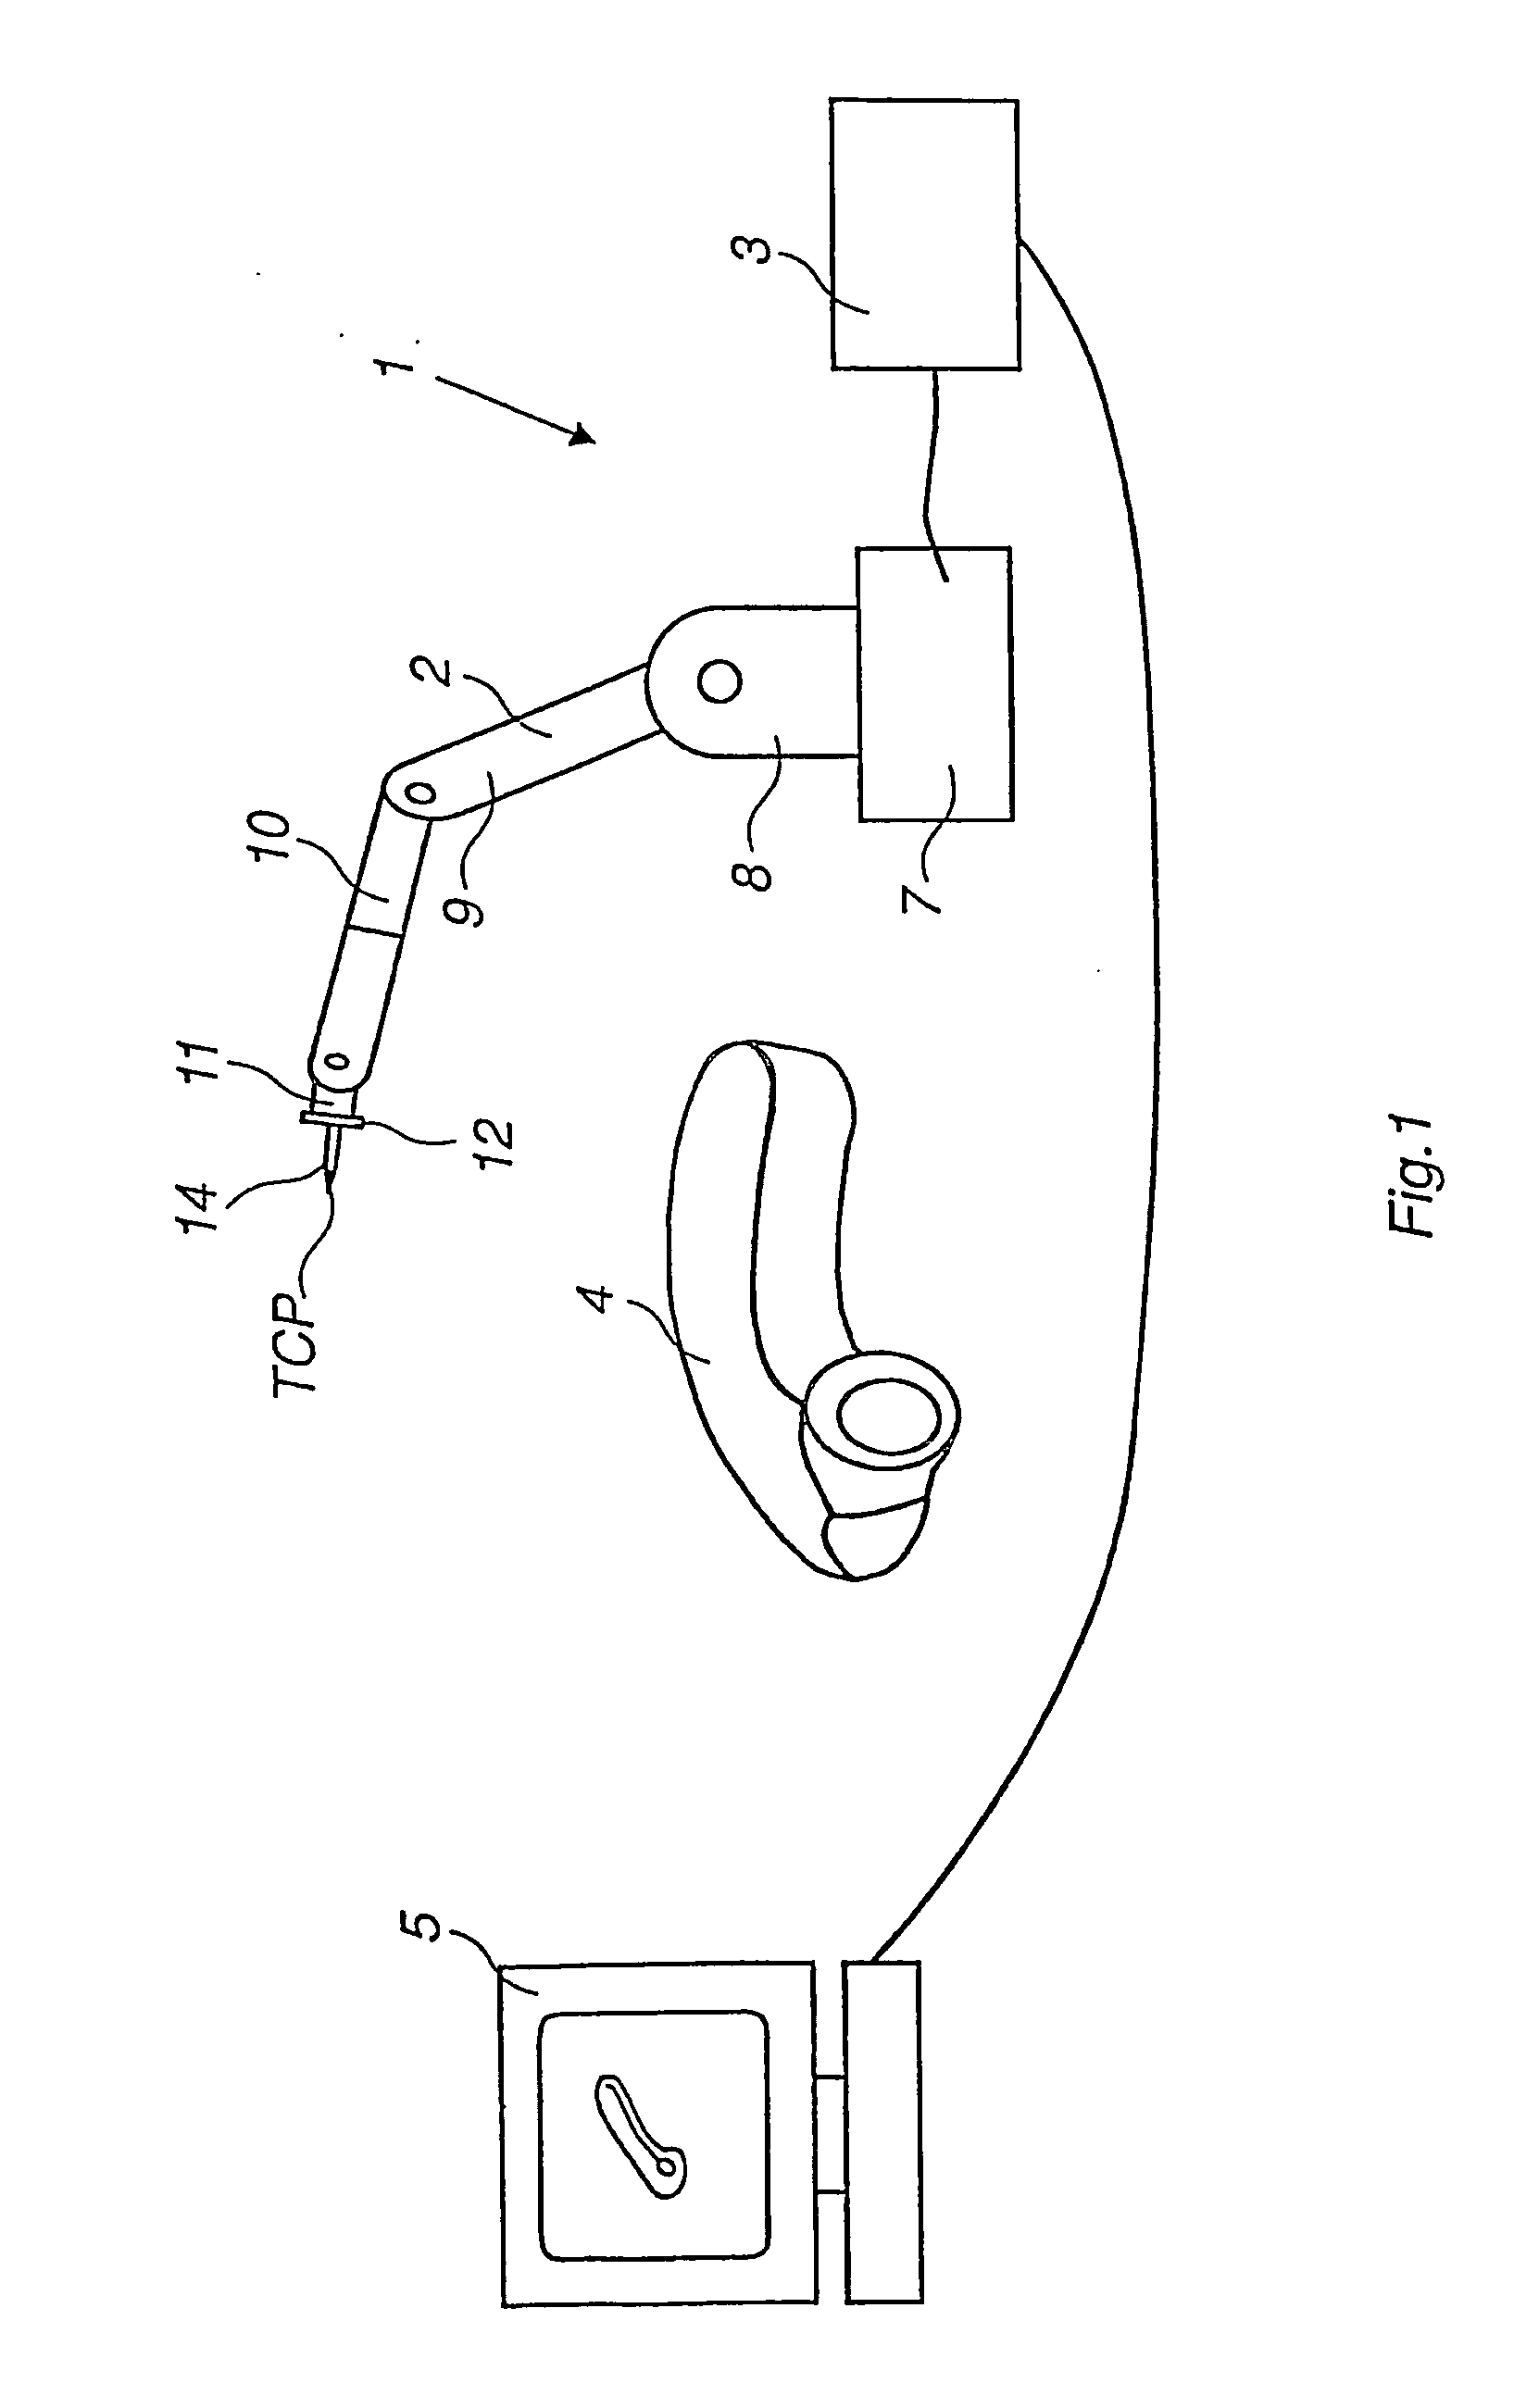 Method and a system for programming an industrial robot to move relative to defined positions on an object, including generation of a surface scanning program